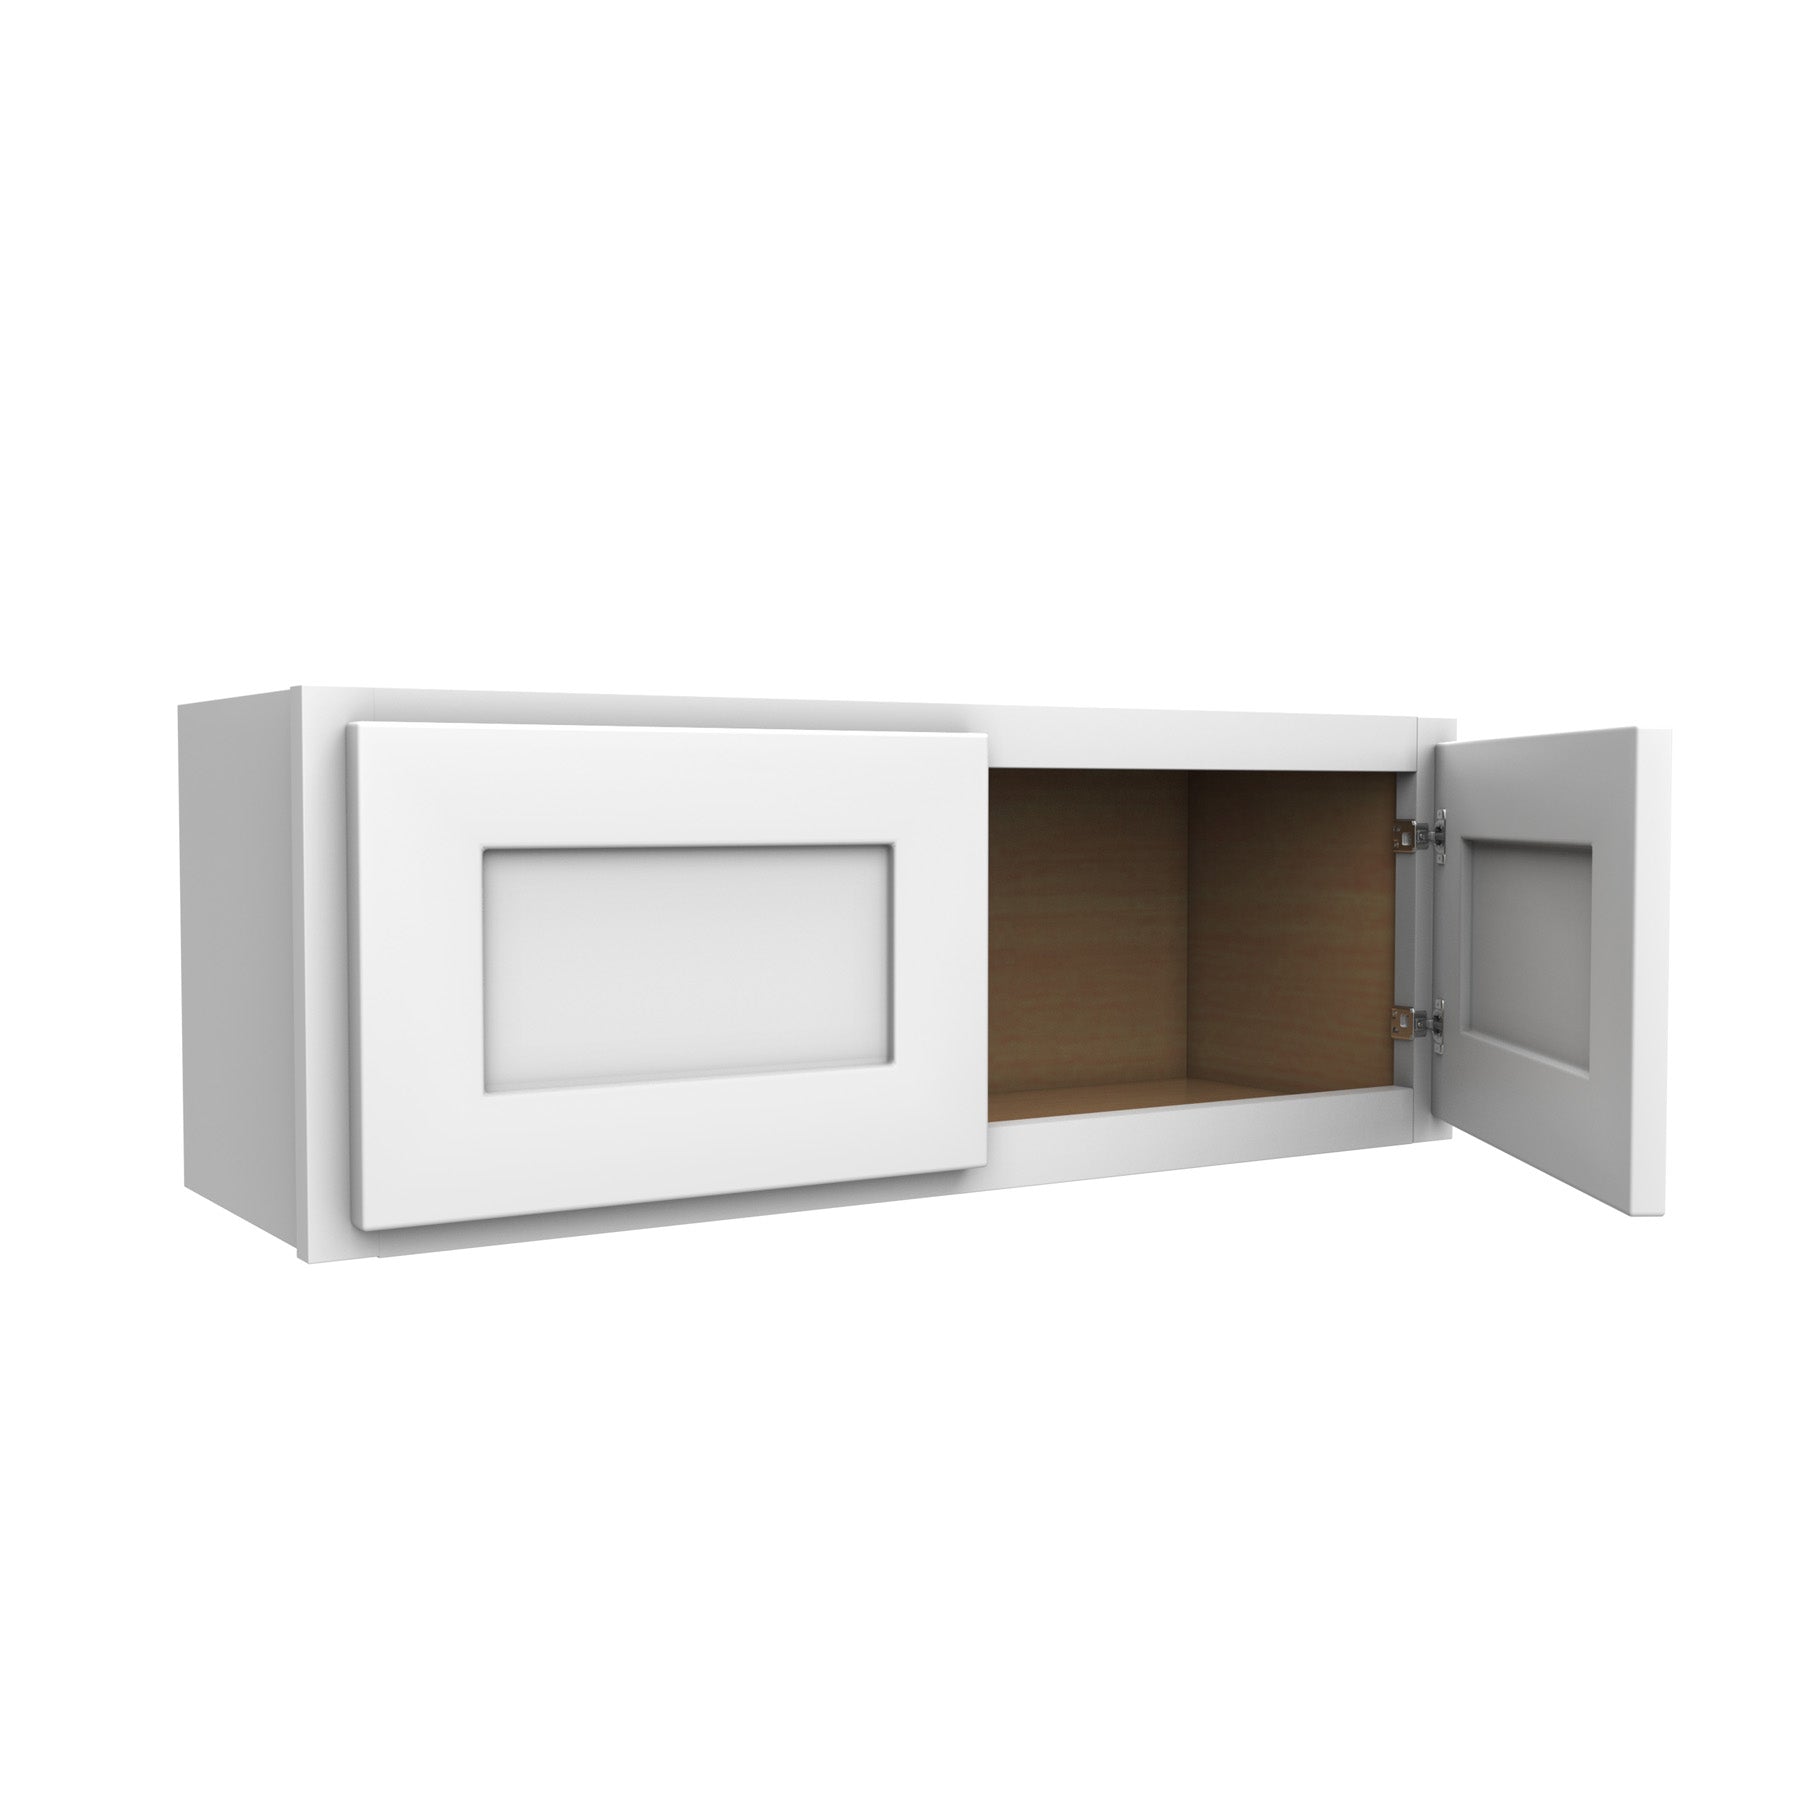 12 Inch High Double Door Wall Cabinet - Luxor White Shaker - Ready To Assemble, 33"W x 12"H x 12"D